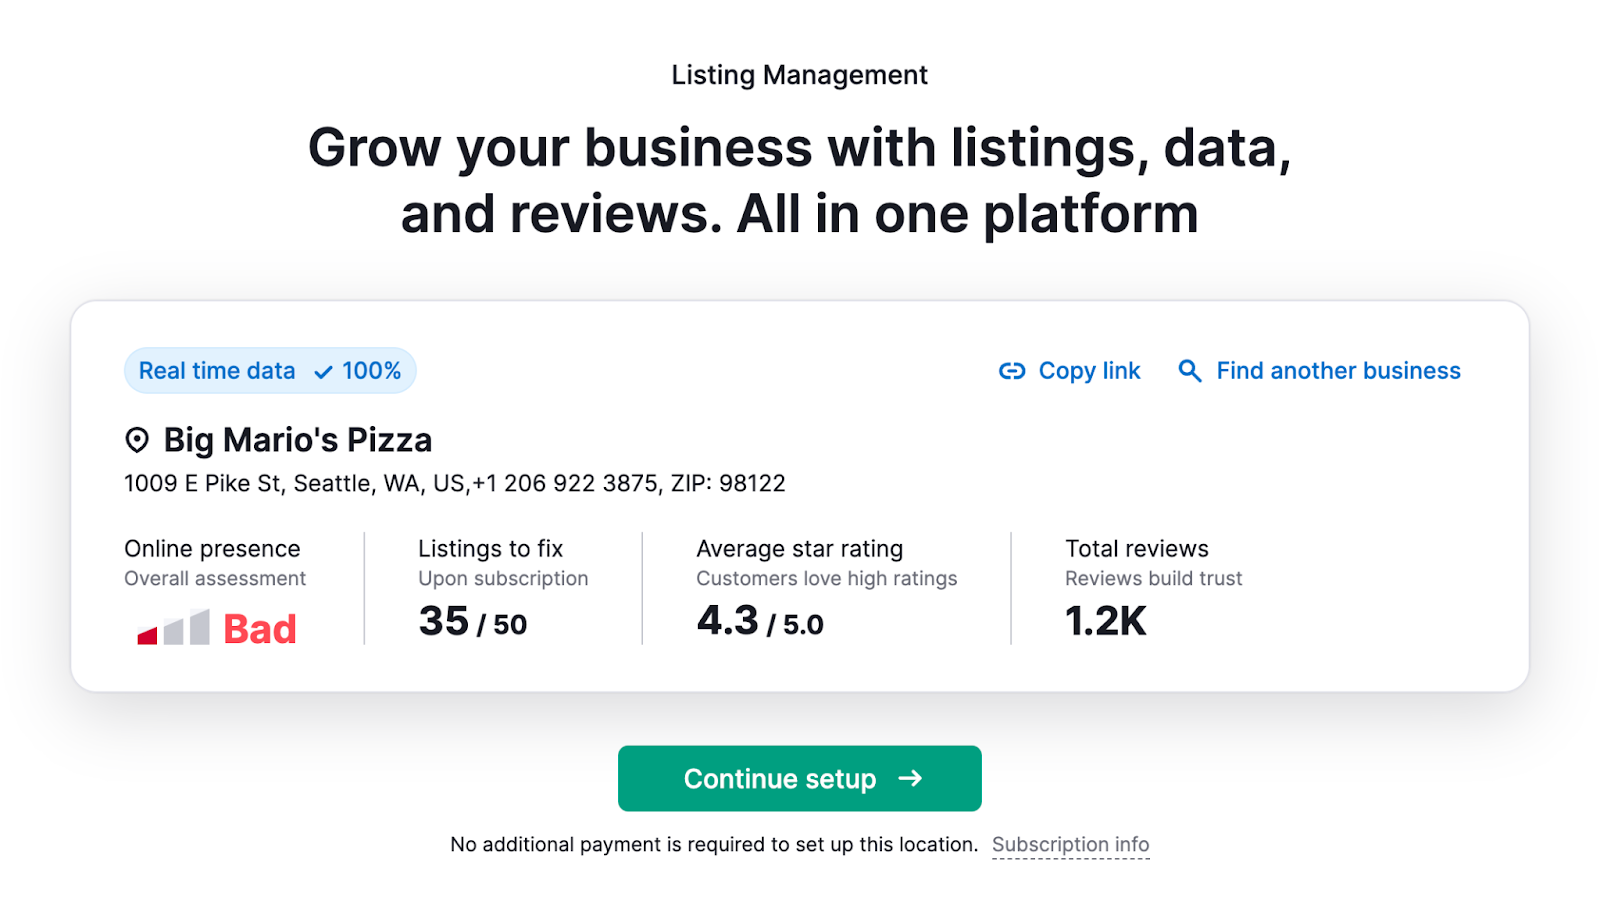 Setting up "Big Mario's Pizza" in Listing Management tool